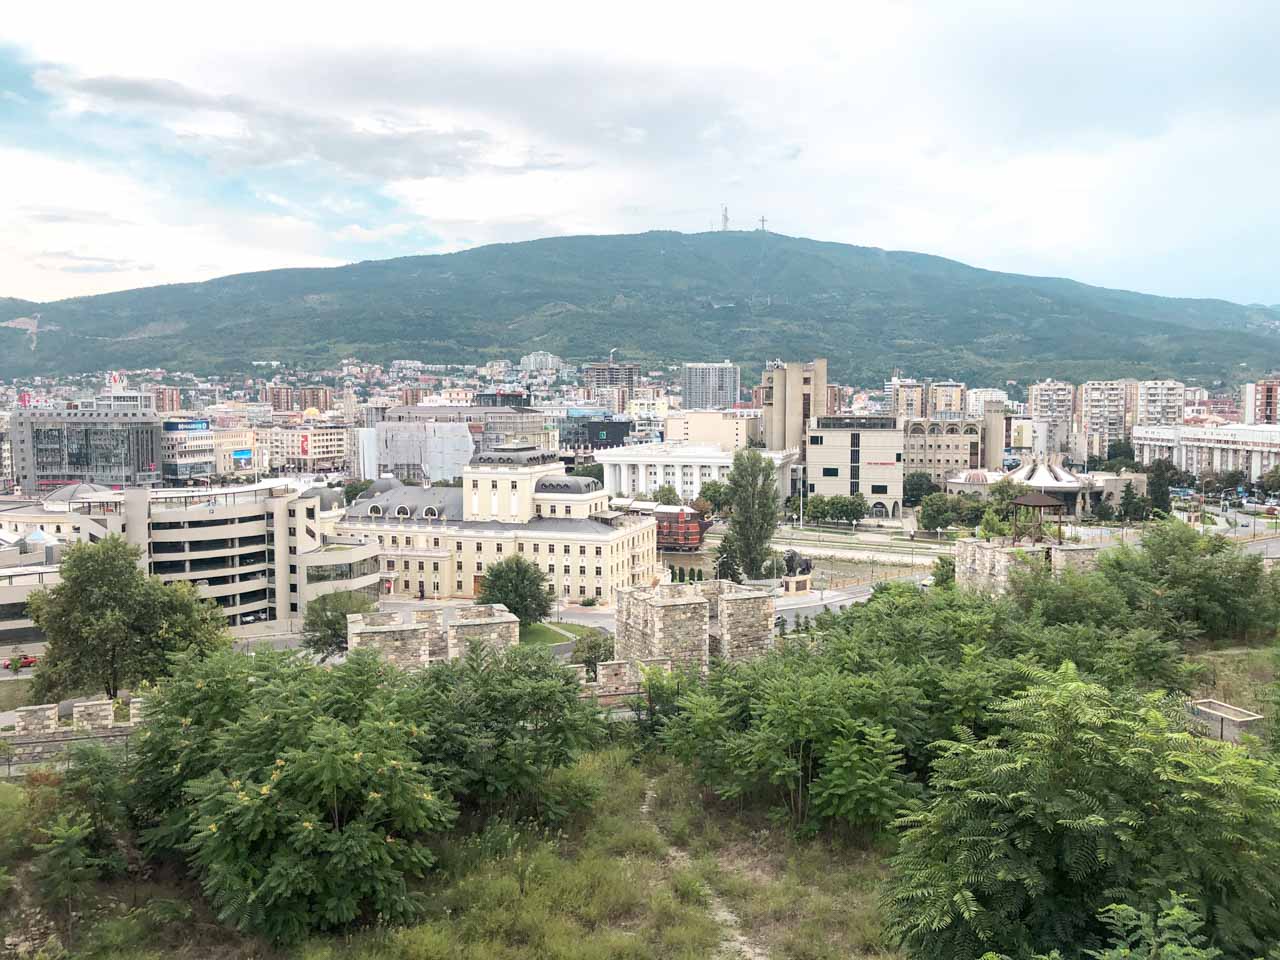 Panorama of Skopje seen from the top of the Skopje Fortress